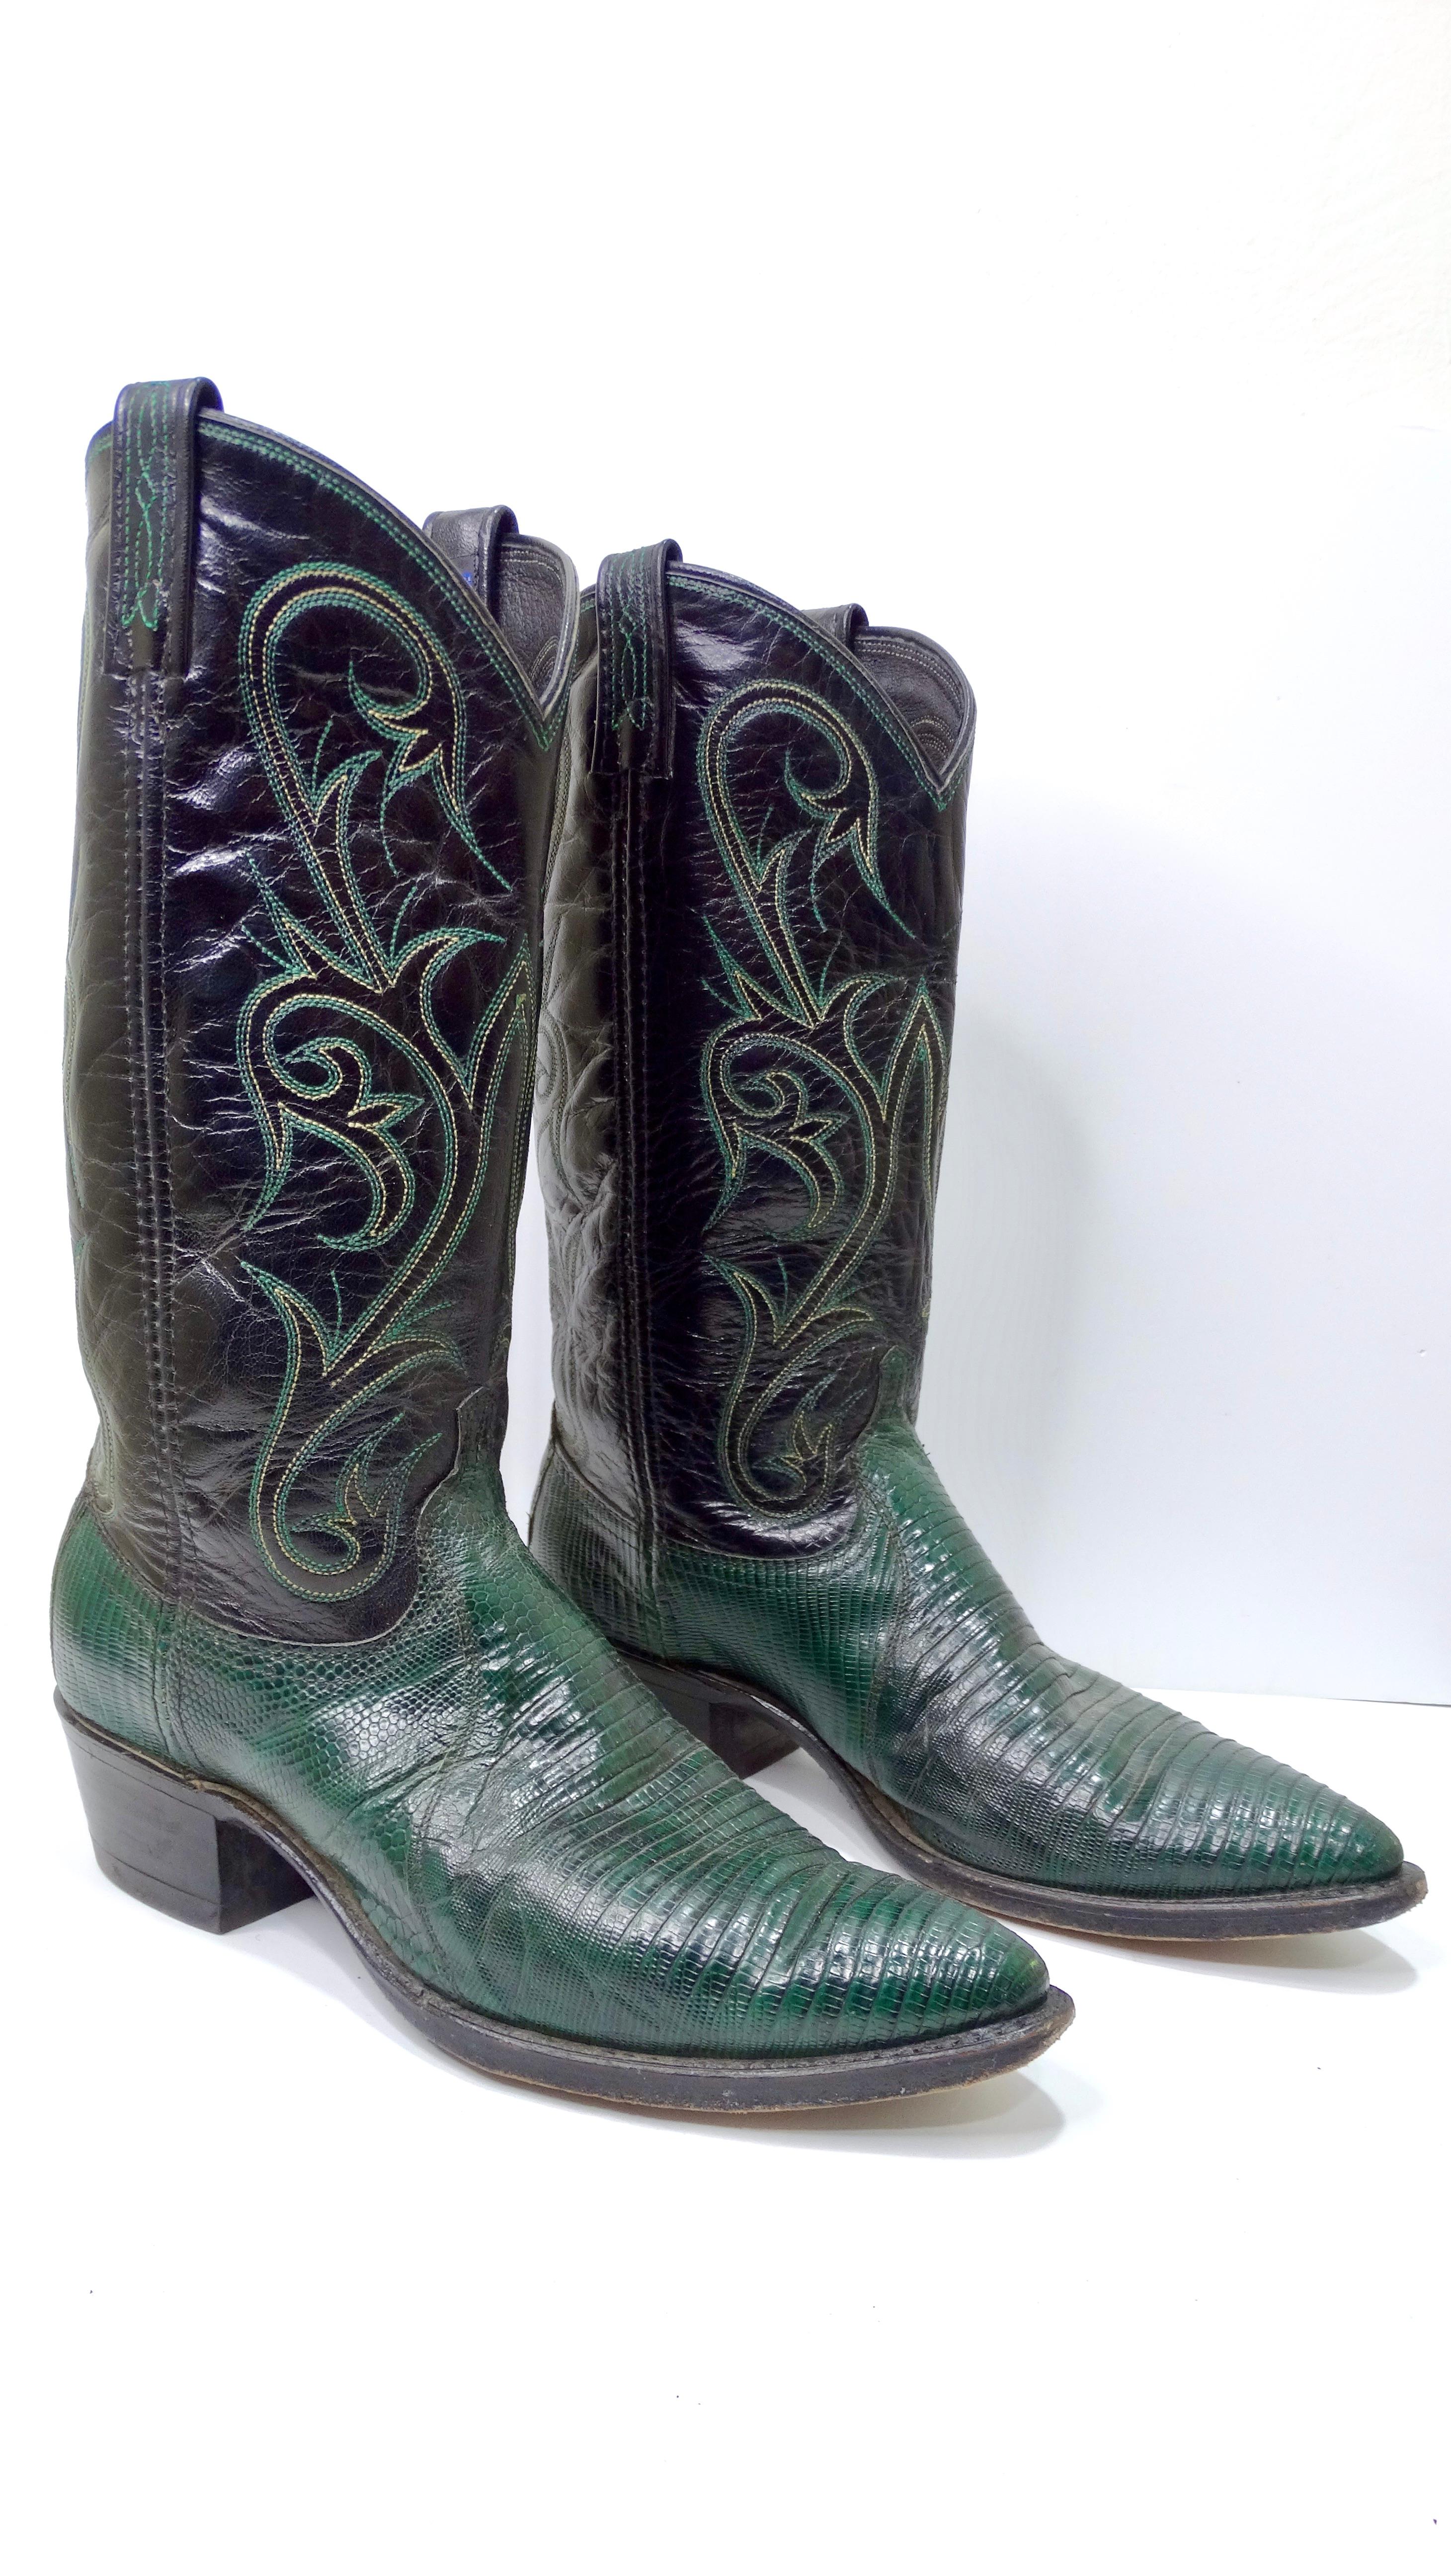 Boots are a girls best friend! Feel like a modern cowgirl with these fun and iconic beauties!  You don't want to miss out on these one-of-a-kind find! These feature a beautiful black leather shaft with green stitching and green lizard leather on the